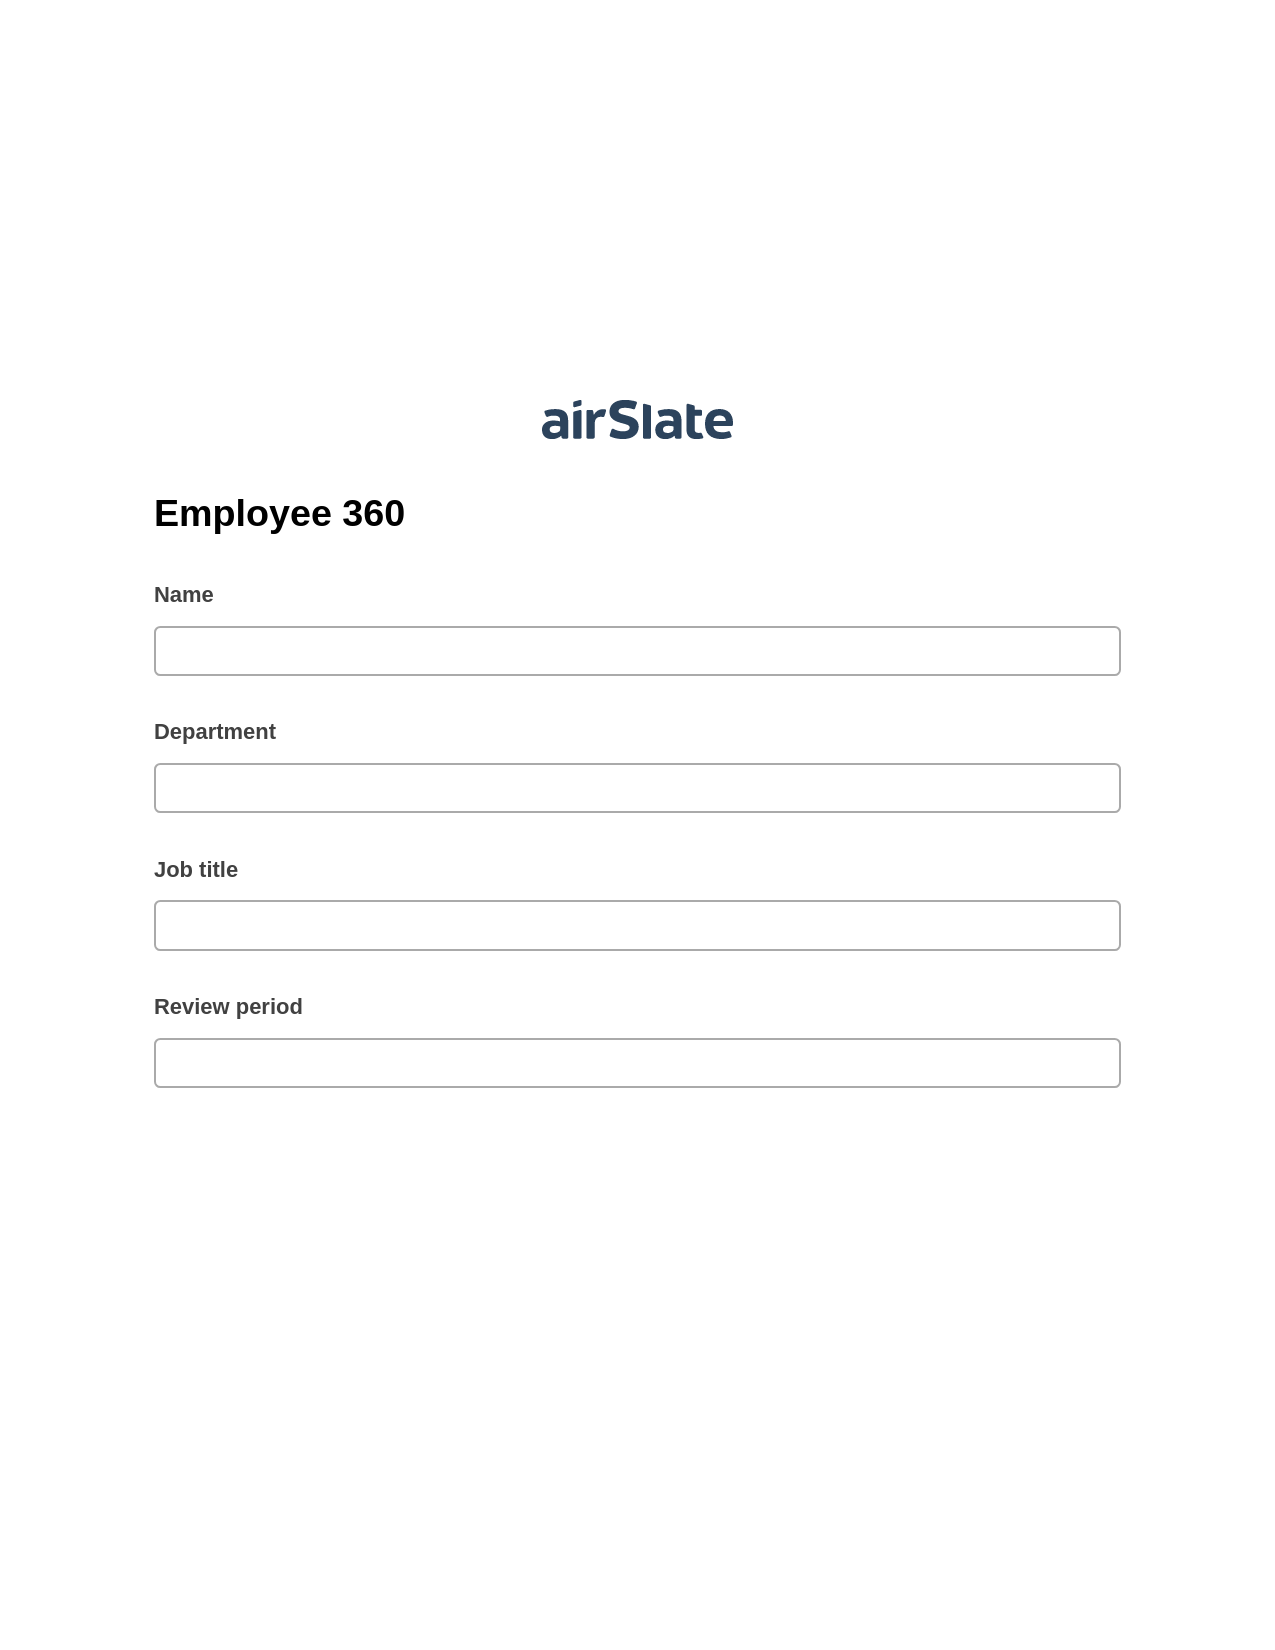 Employee 360 Pre-fill from CSV File Bot, Webhook Bot, Export to Smartsheet